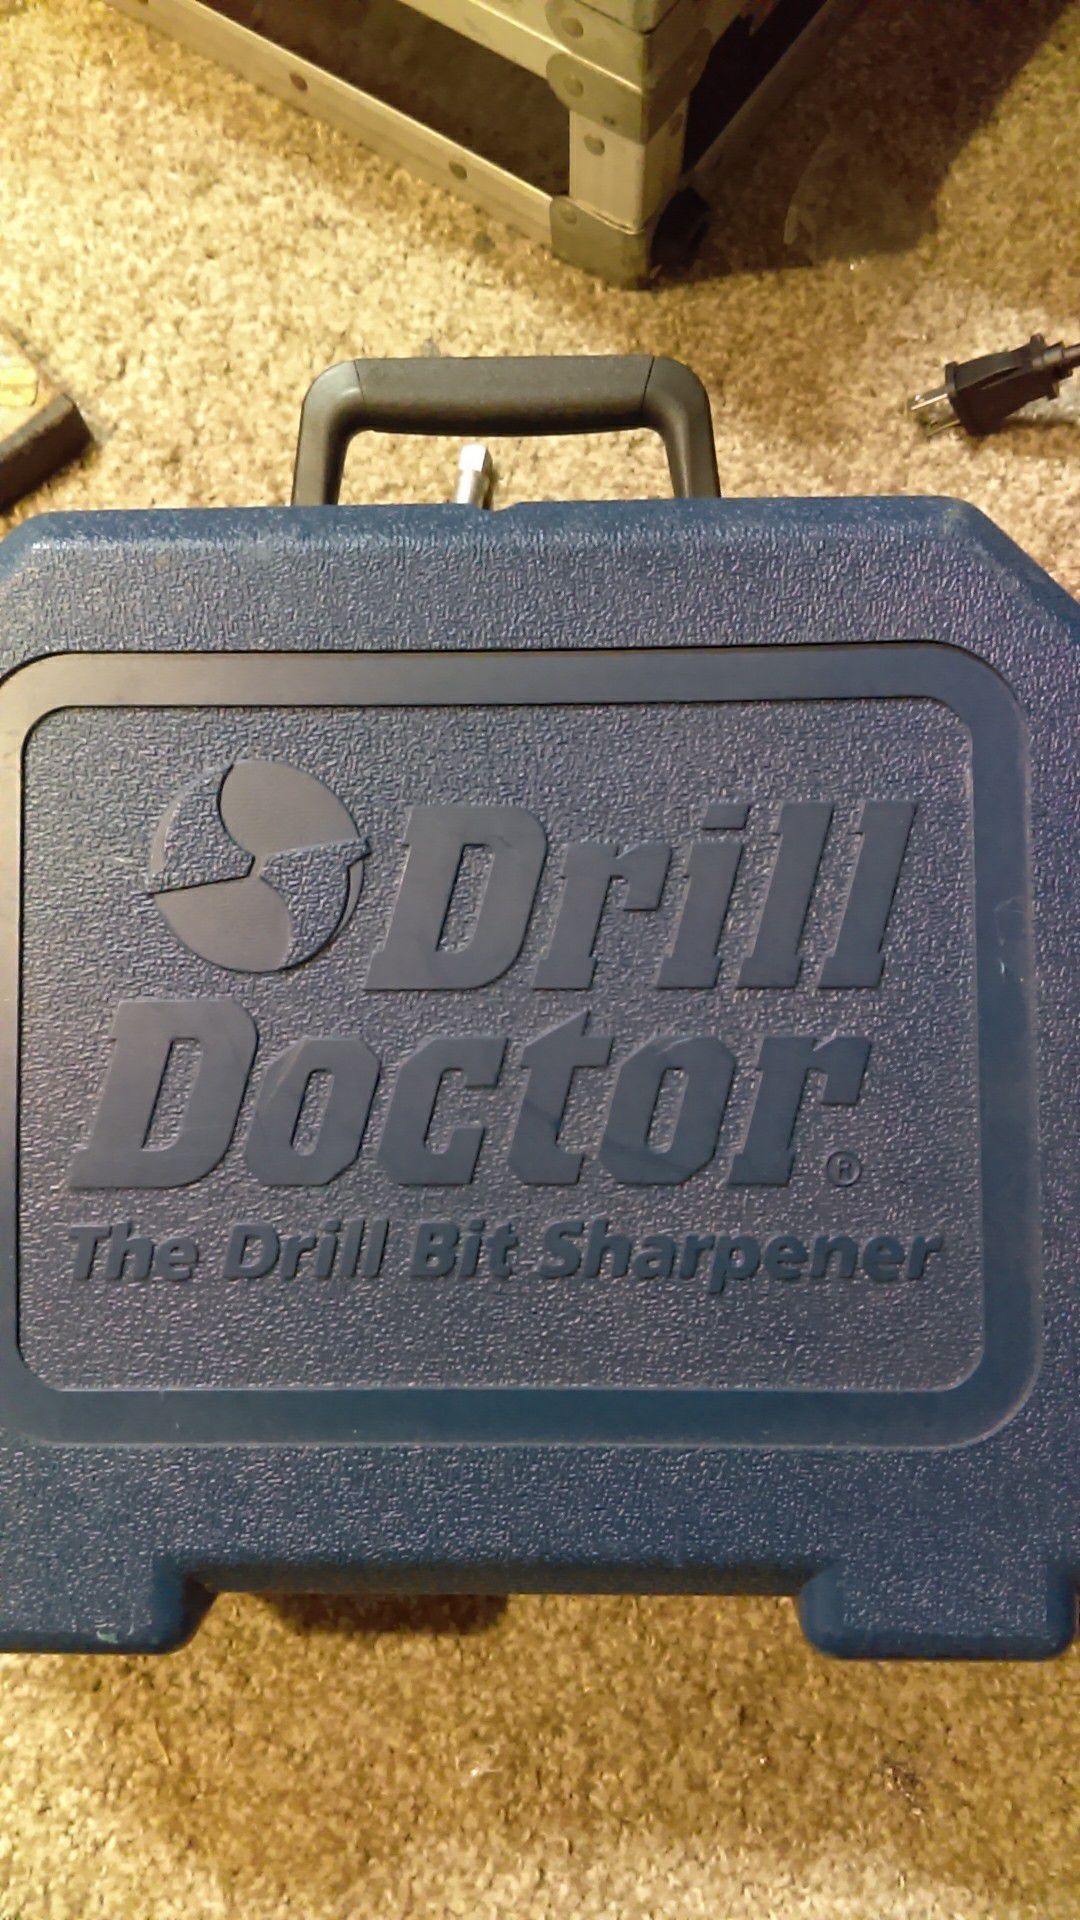 Drill doctor